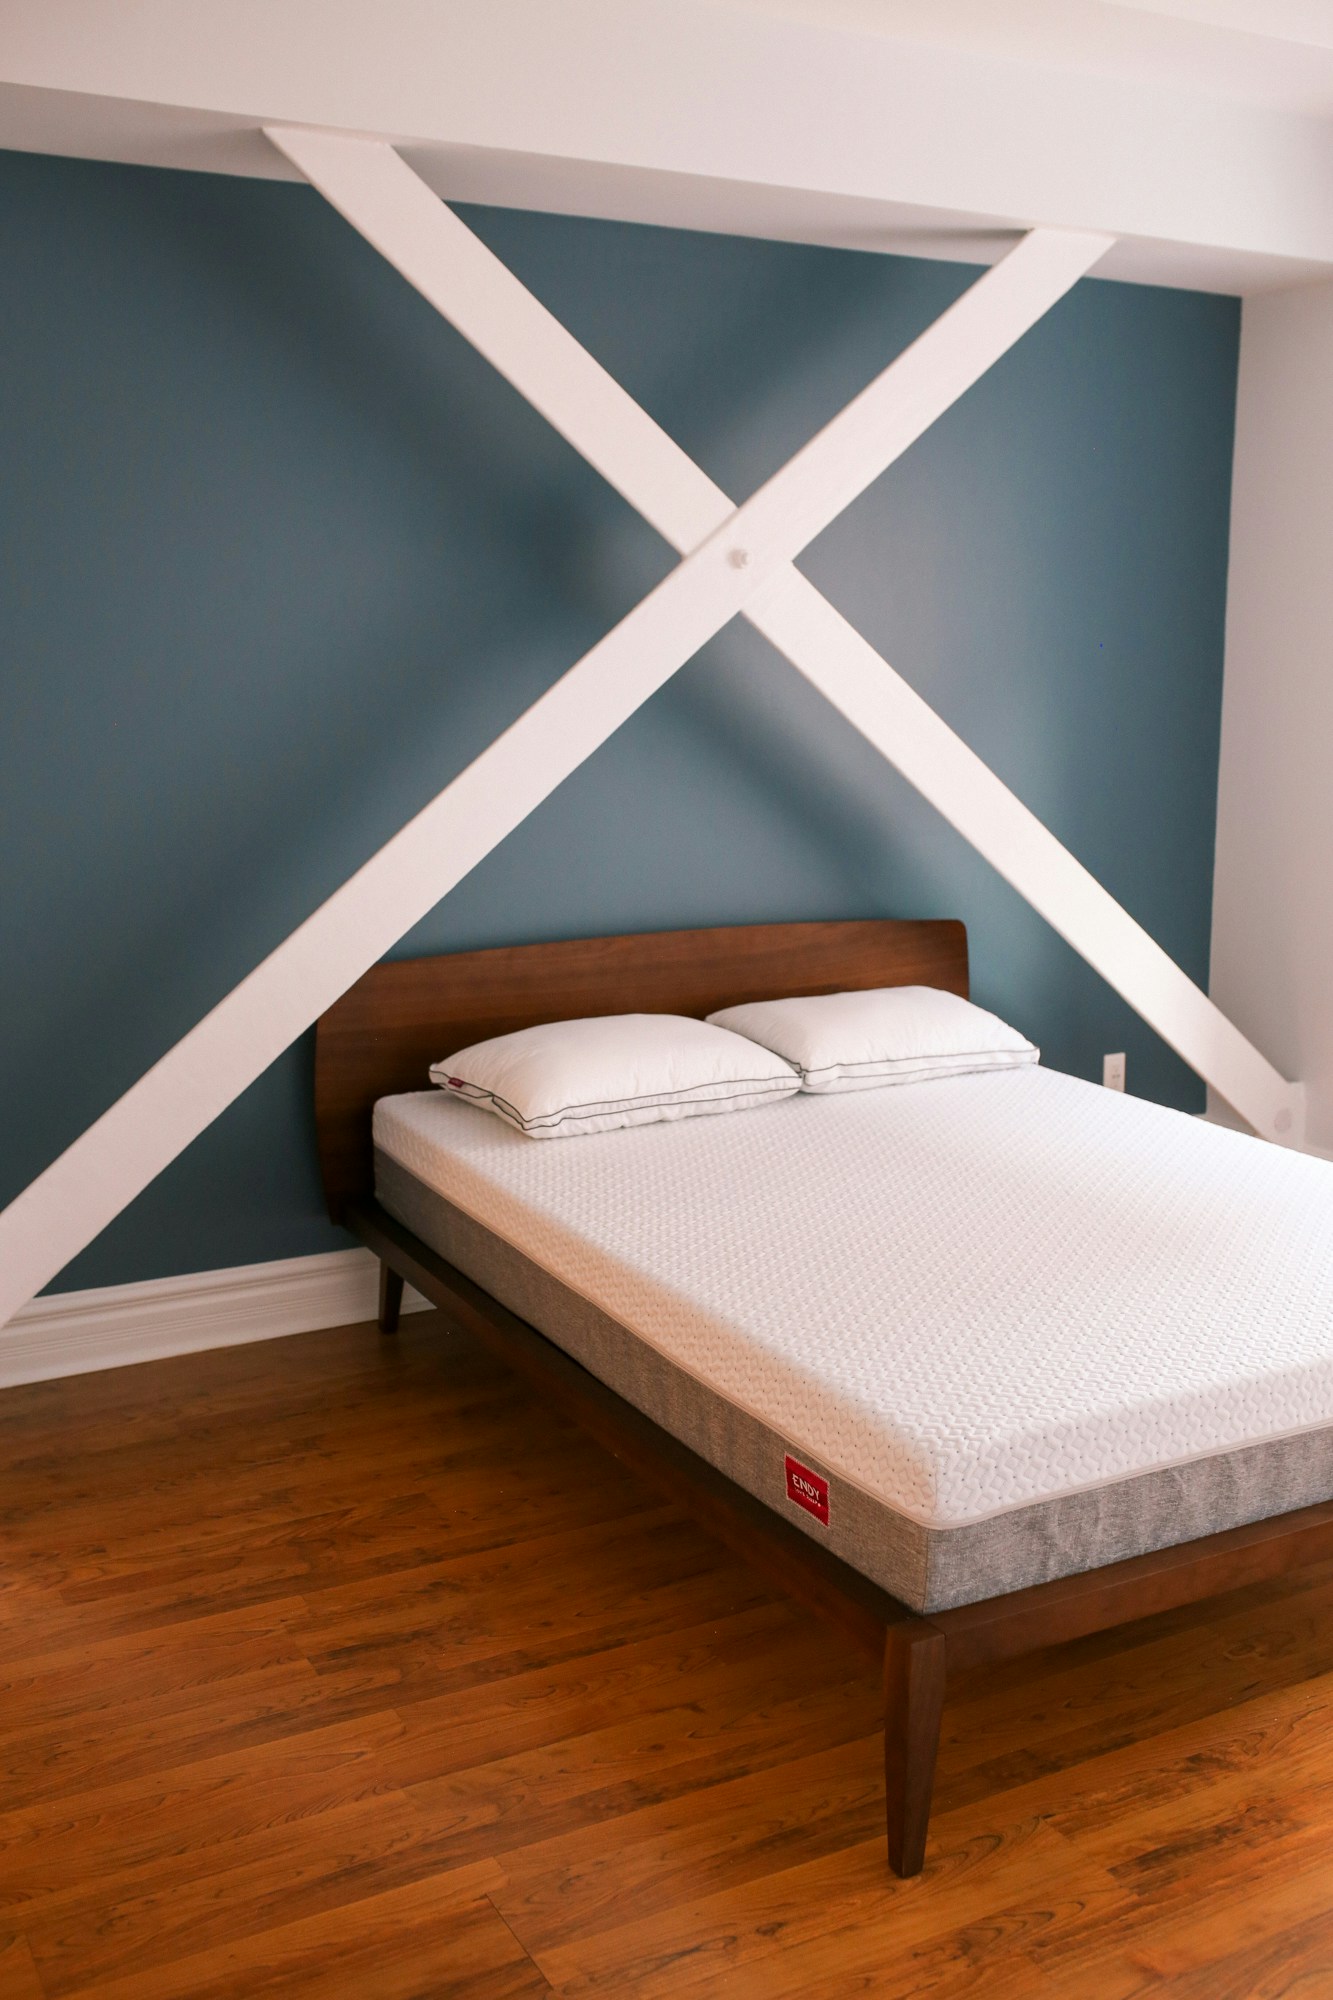 Queen Endy Mattress - review on whether the bed is worth it, comfortable and easy to set up!